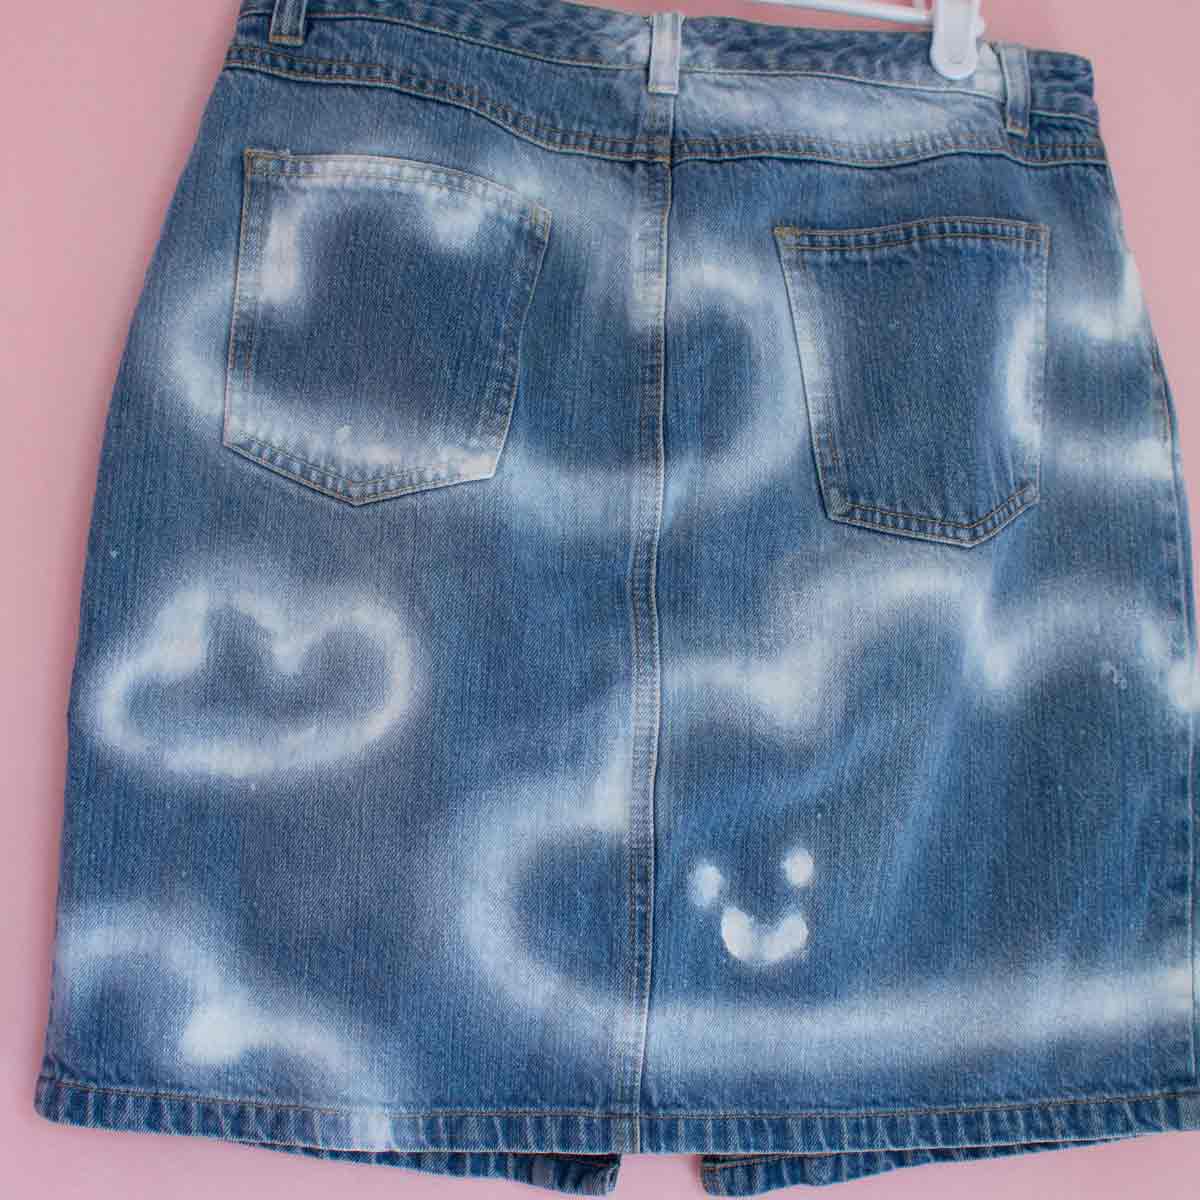 Upcycled Spray Painted Skirt